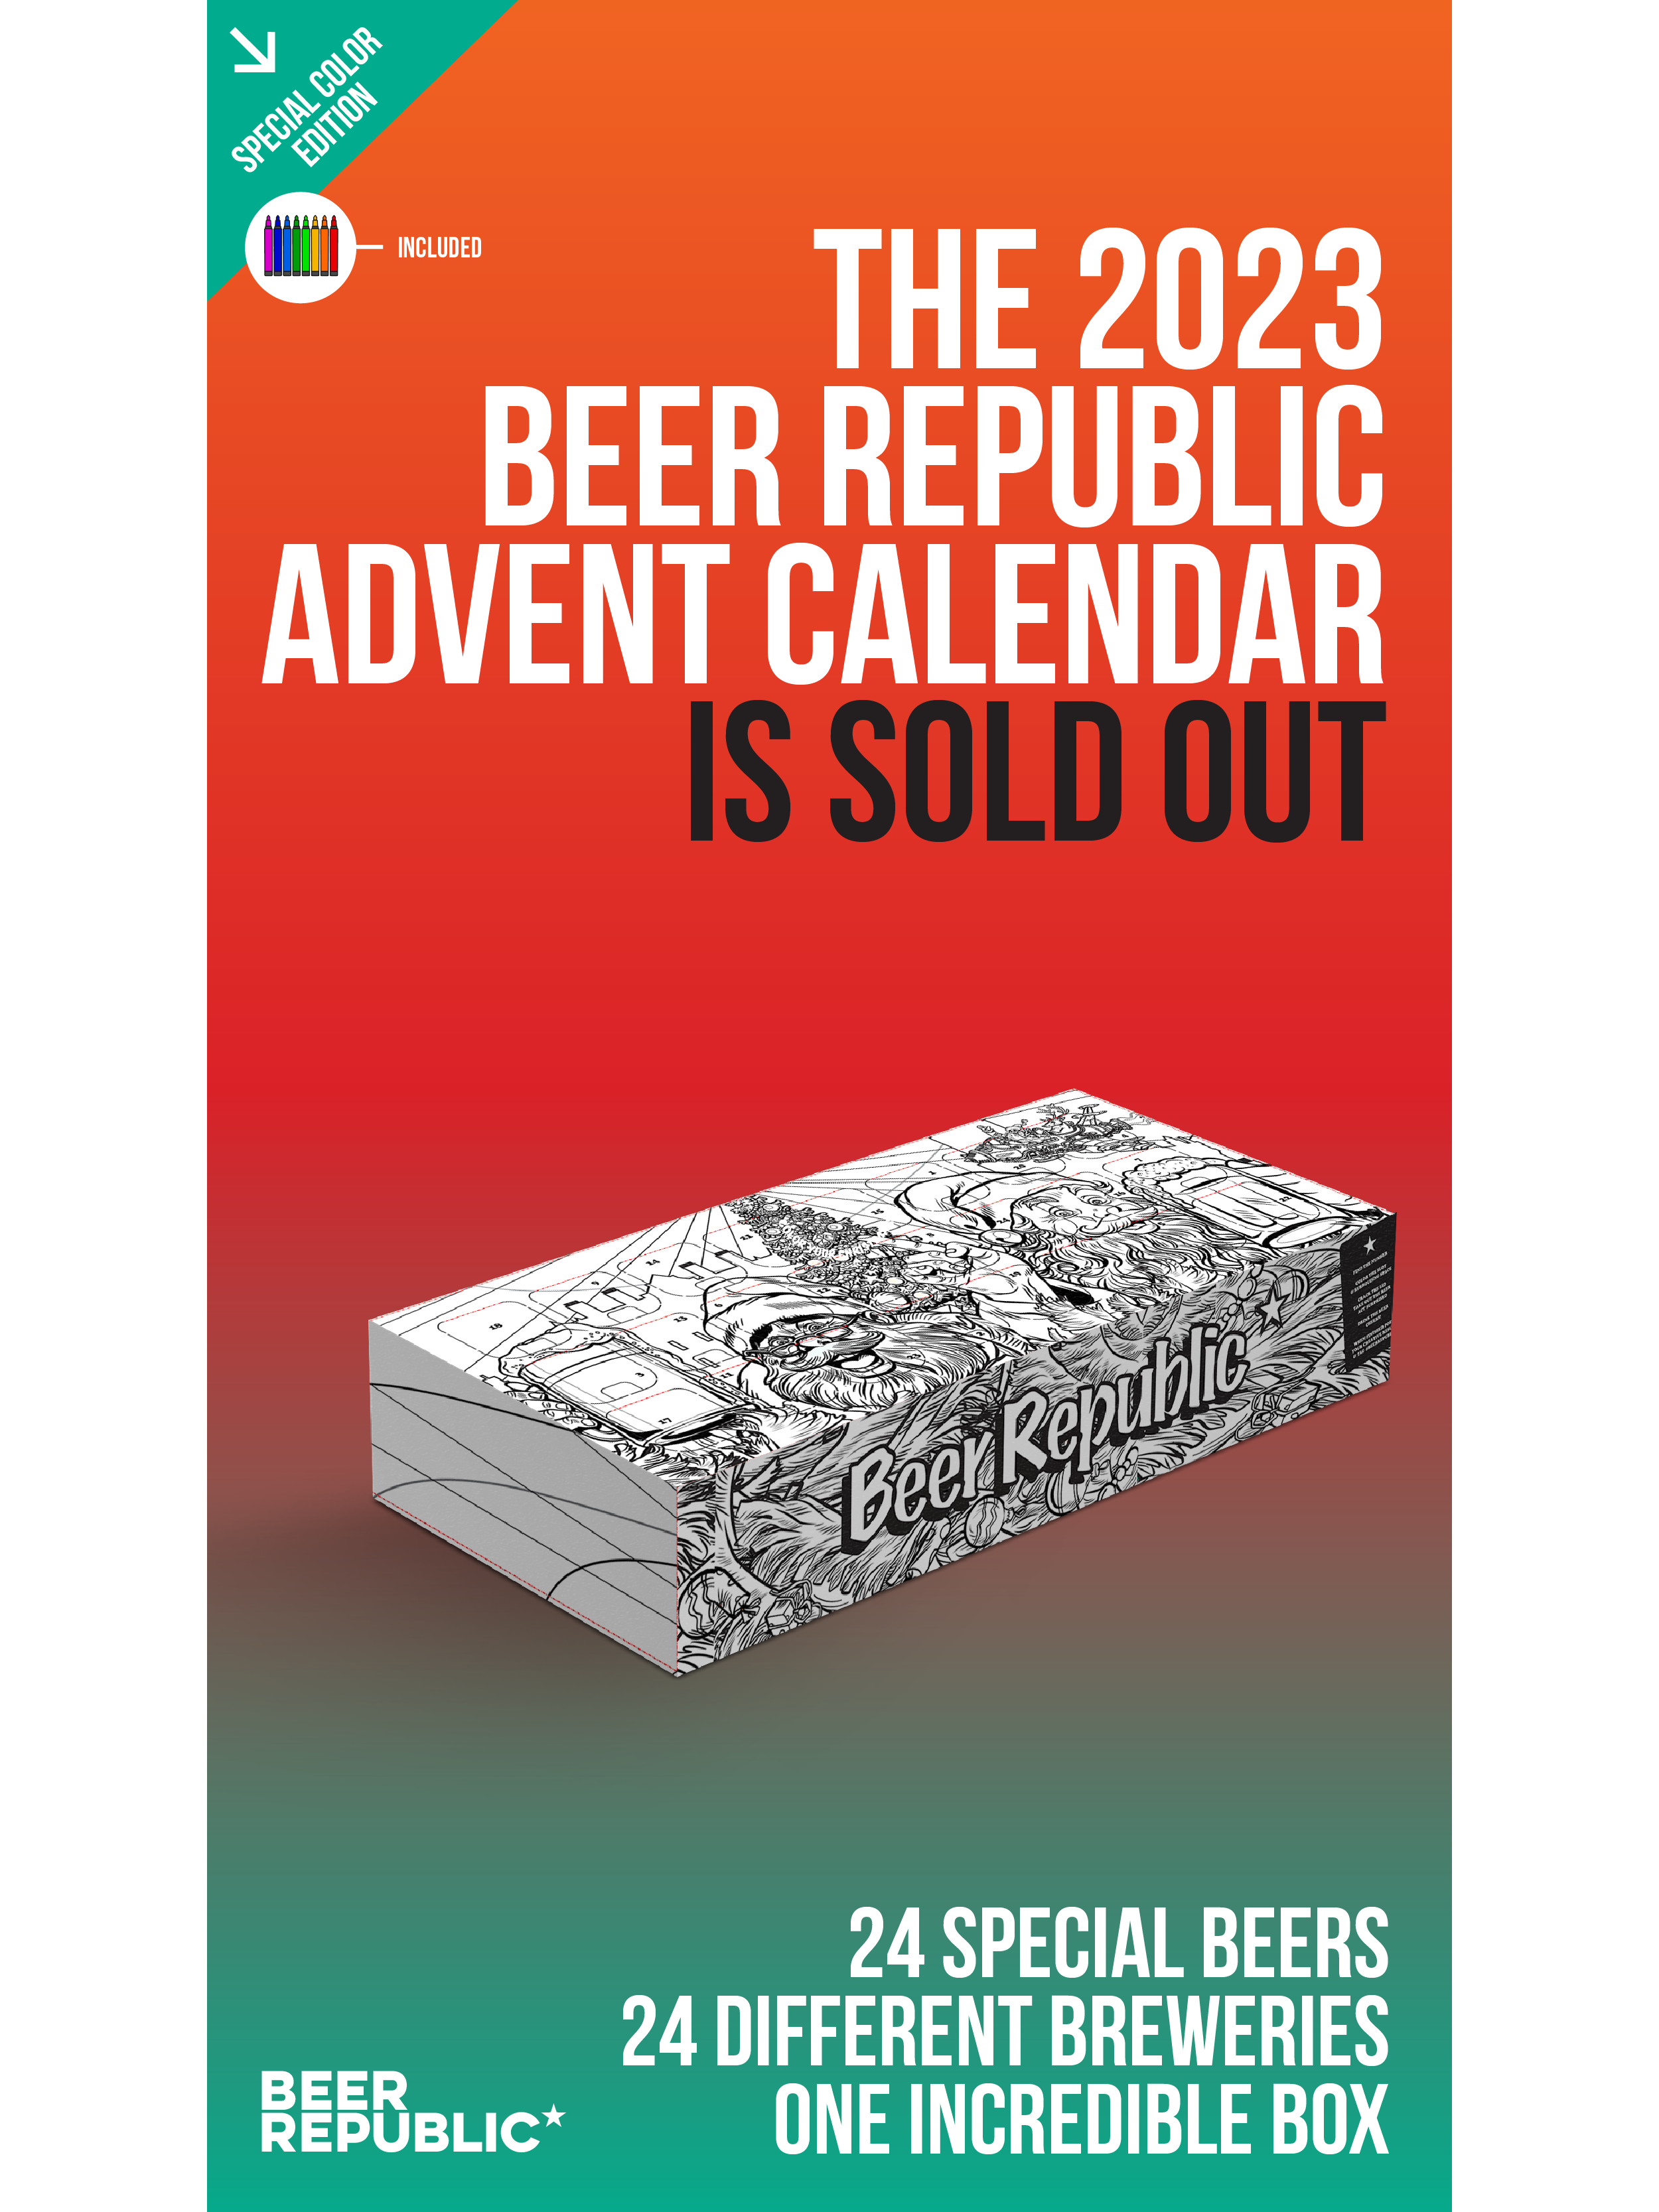 -Beer Republic- The Beer Republic Advent Calendar 2023-Packs & Cases- Only @ Beer Republic - The best online beer store for American & Canadian craft beer - Buy beer online from the USA and Canada - Bier online kopen - Amerikaans bier kopen - Craft beer store - Craft beer kopen - Amerikanisch bier kaufen - Bier online kaufen - Acheter biere online - IPA - Stout - Porter - New England IPA - Hazy IPA - Imperial Stout - Barrel Aged - Barrel Aged Imperial Stout - Brown - Dark beer - Blond - Blonde - Pilsner - L